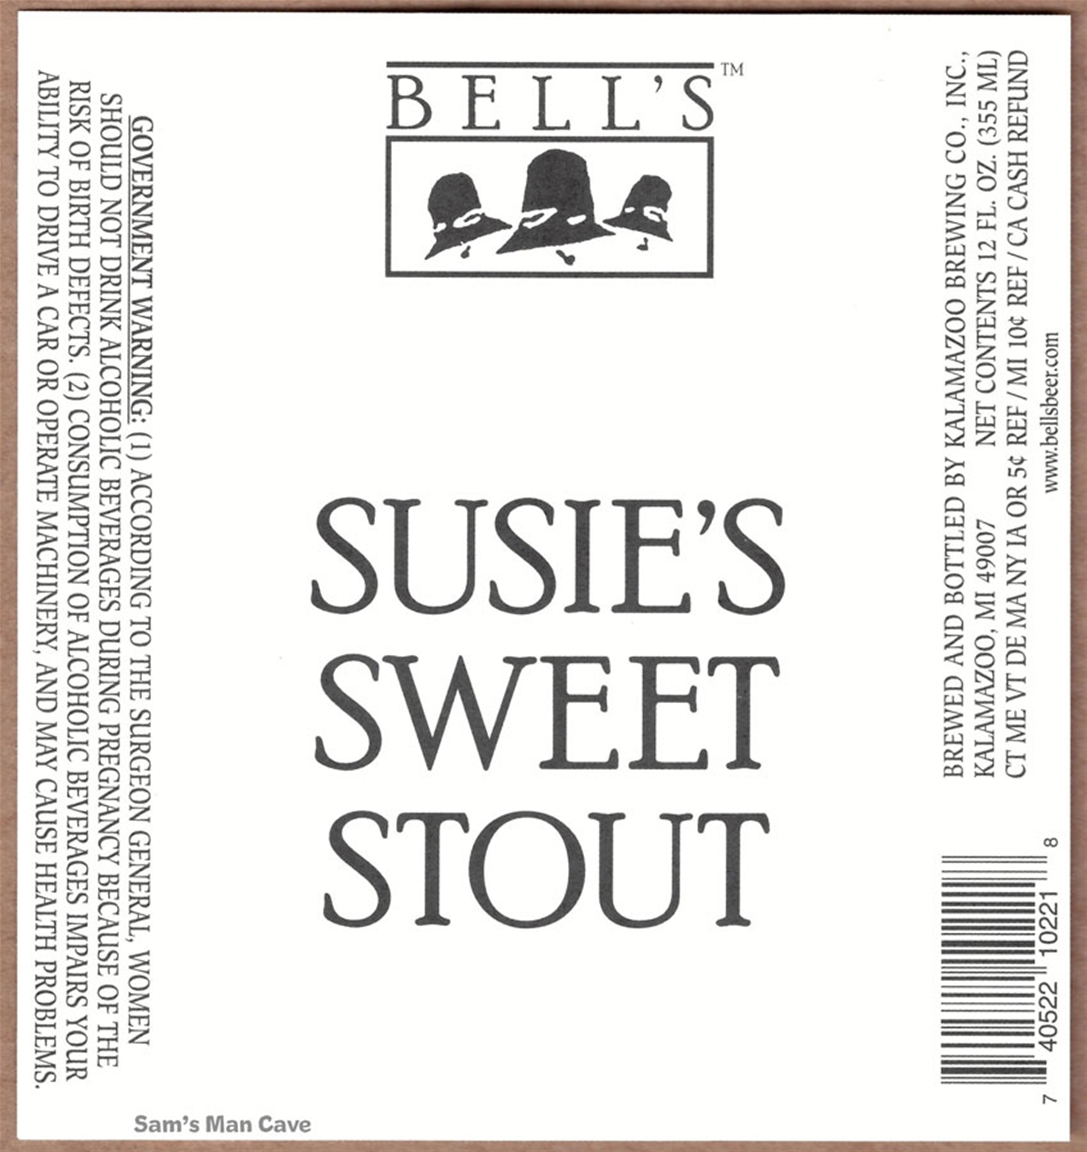 Bell's Susie's Sweet Stout Label